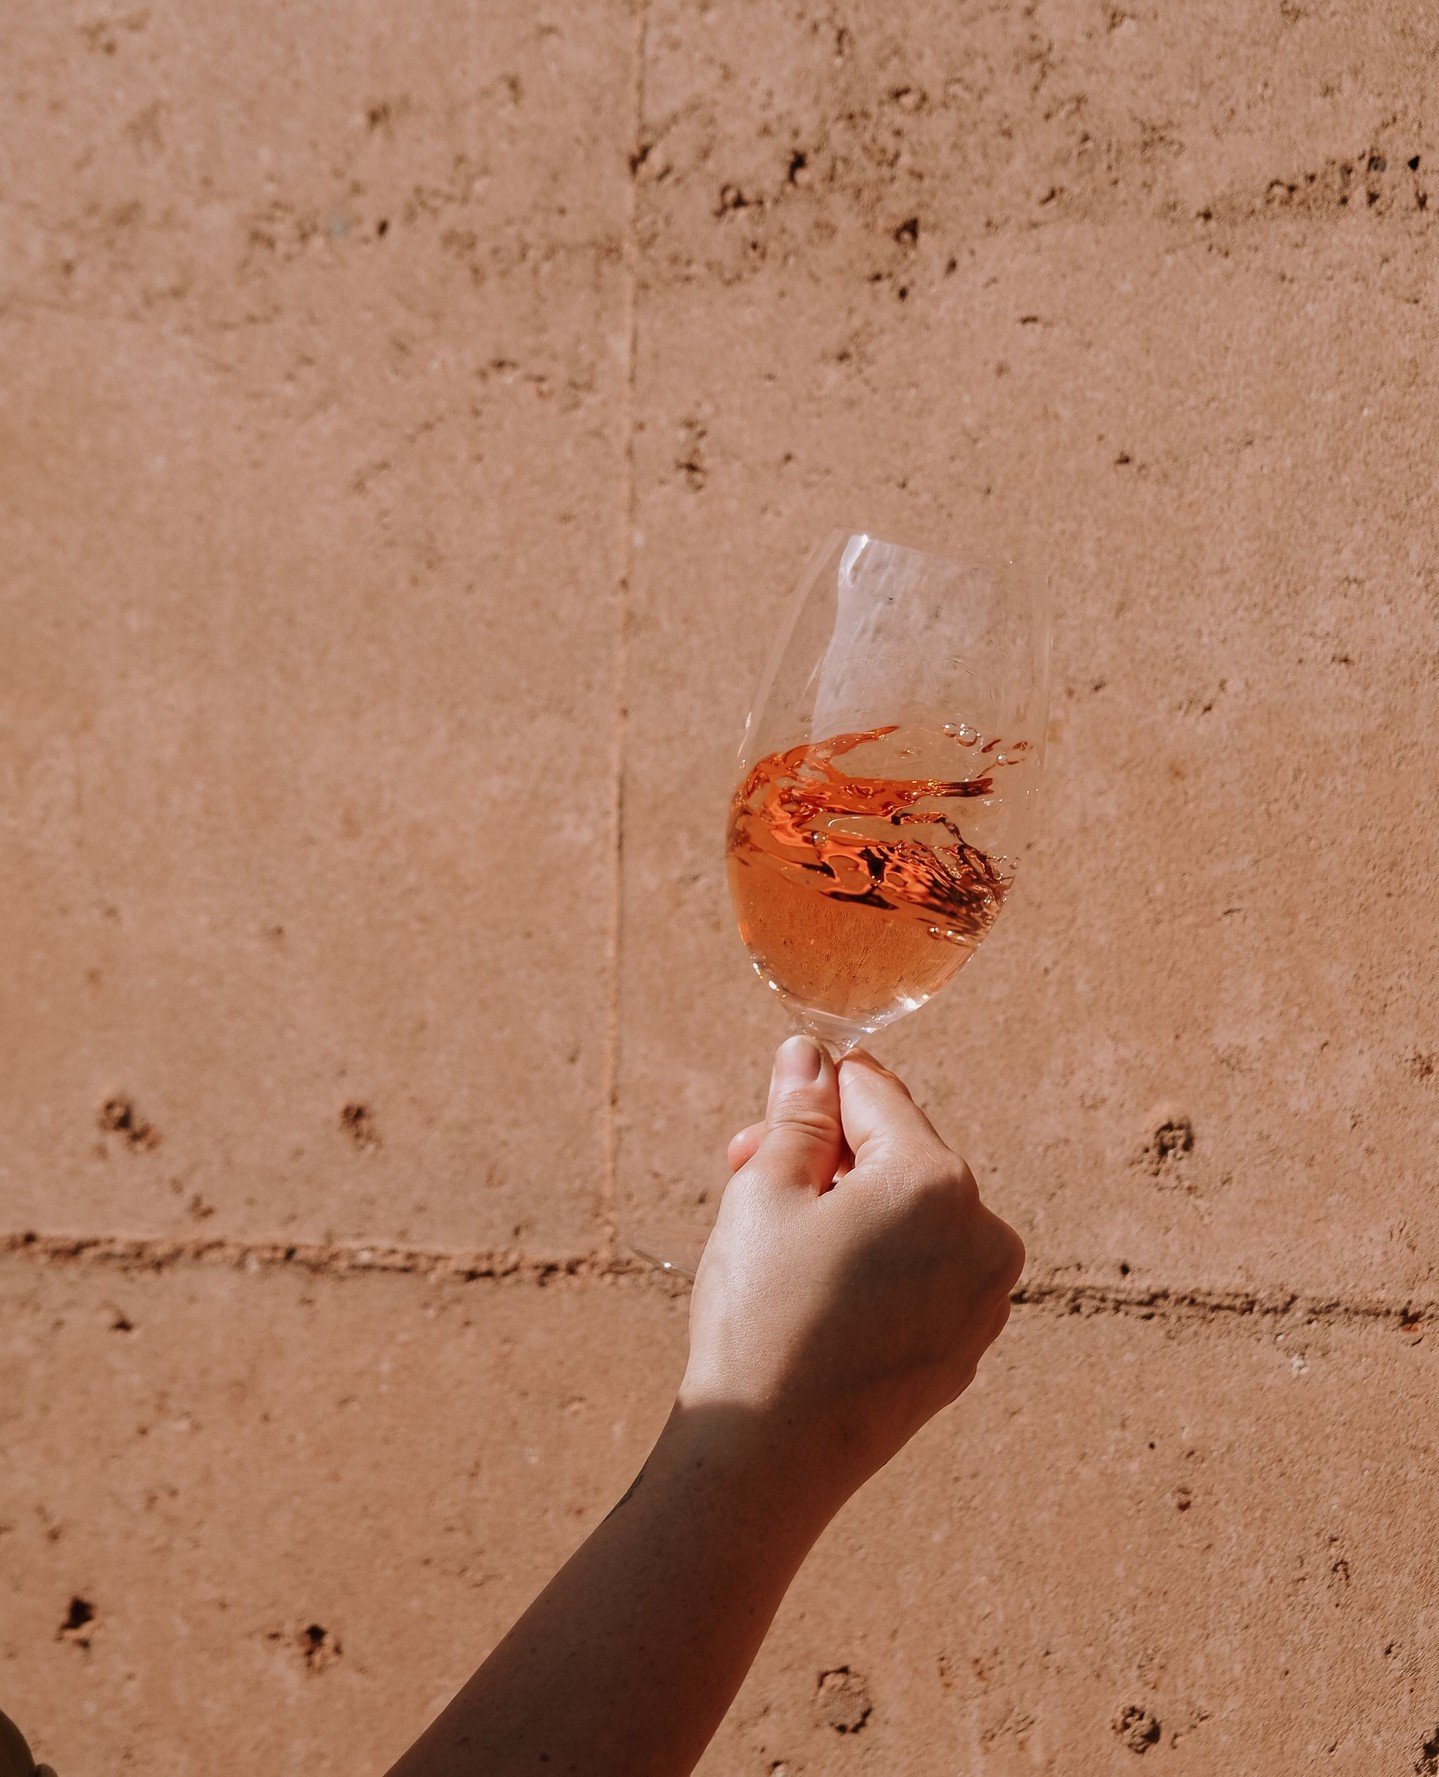 We are bottling some of our 2024 vintage this week and there is a brand new ros&eacute; for you to taste!⁠
⁠
Any guesses on what variety we are playing with??⁠
⁠
⁠
📸: @the.uncommon_⁠
.⁠
.⁠
.⁠
.⁠
.⁠
#greendoorwines #fergusonvalley #discoverfergusonva